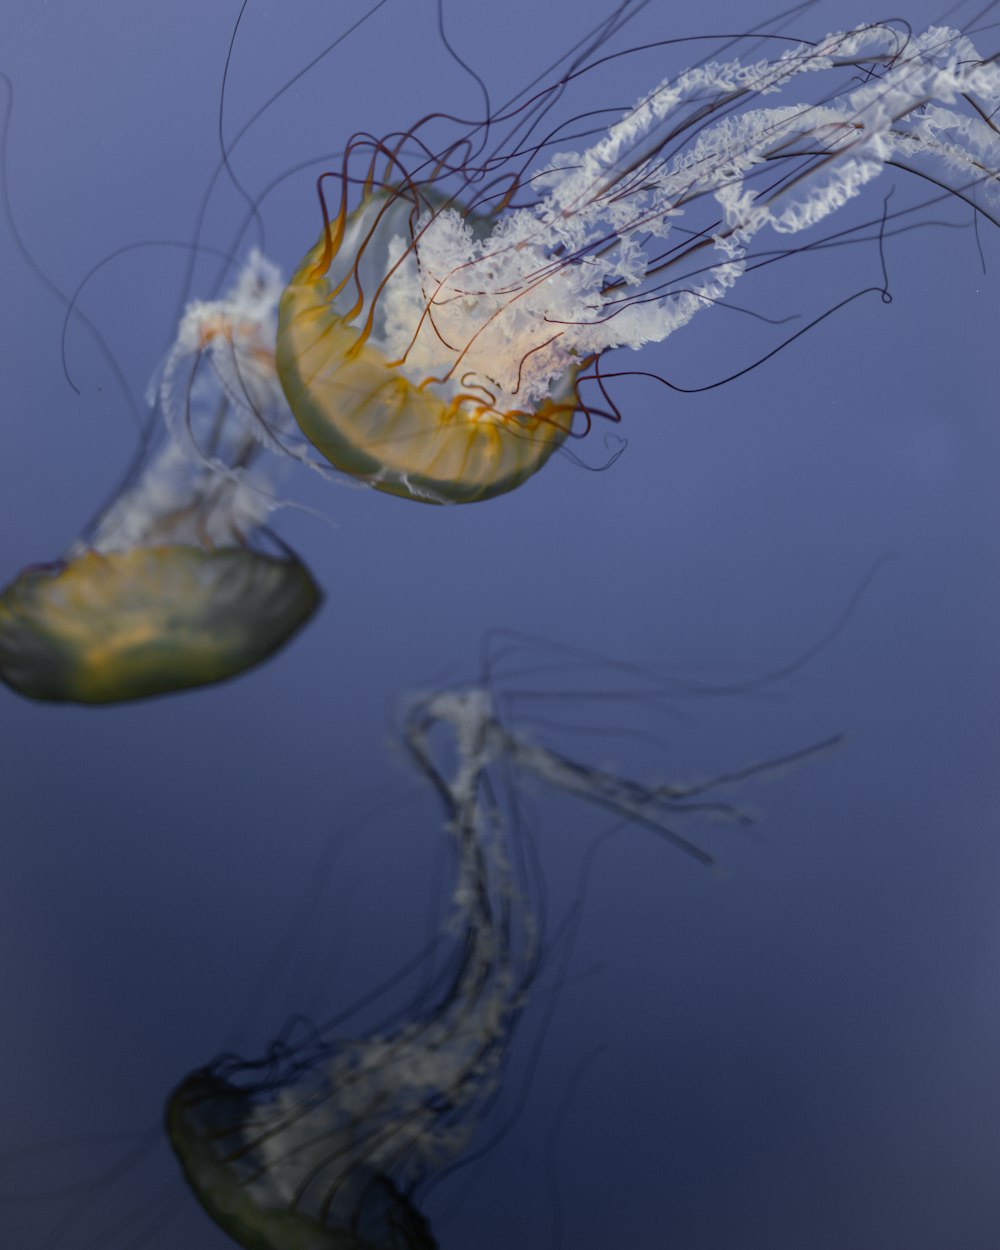 yellow and blue jellyfish in water